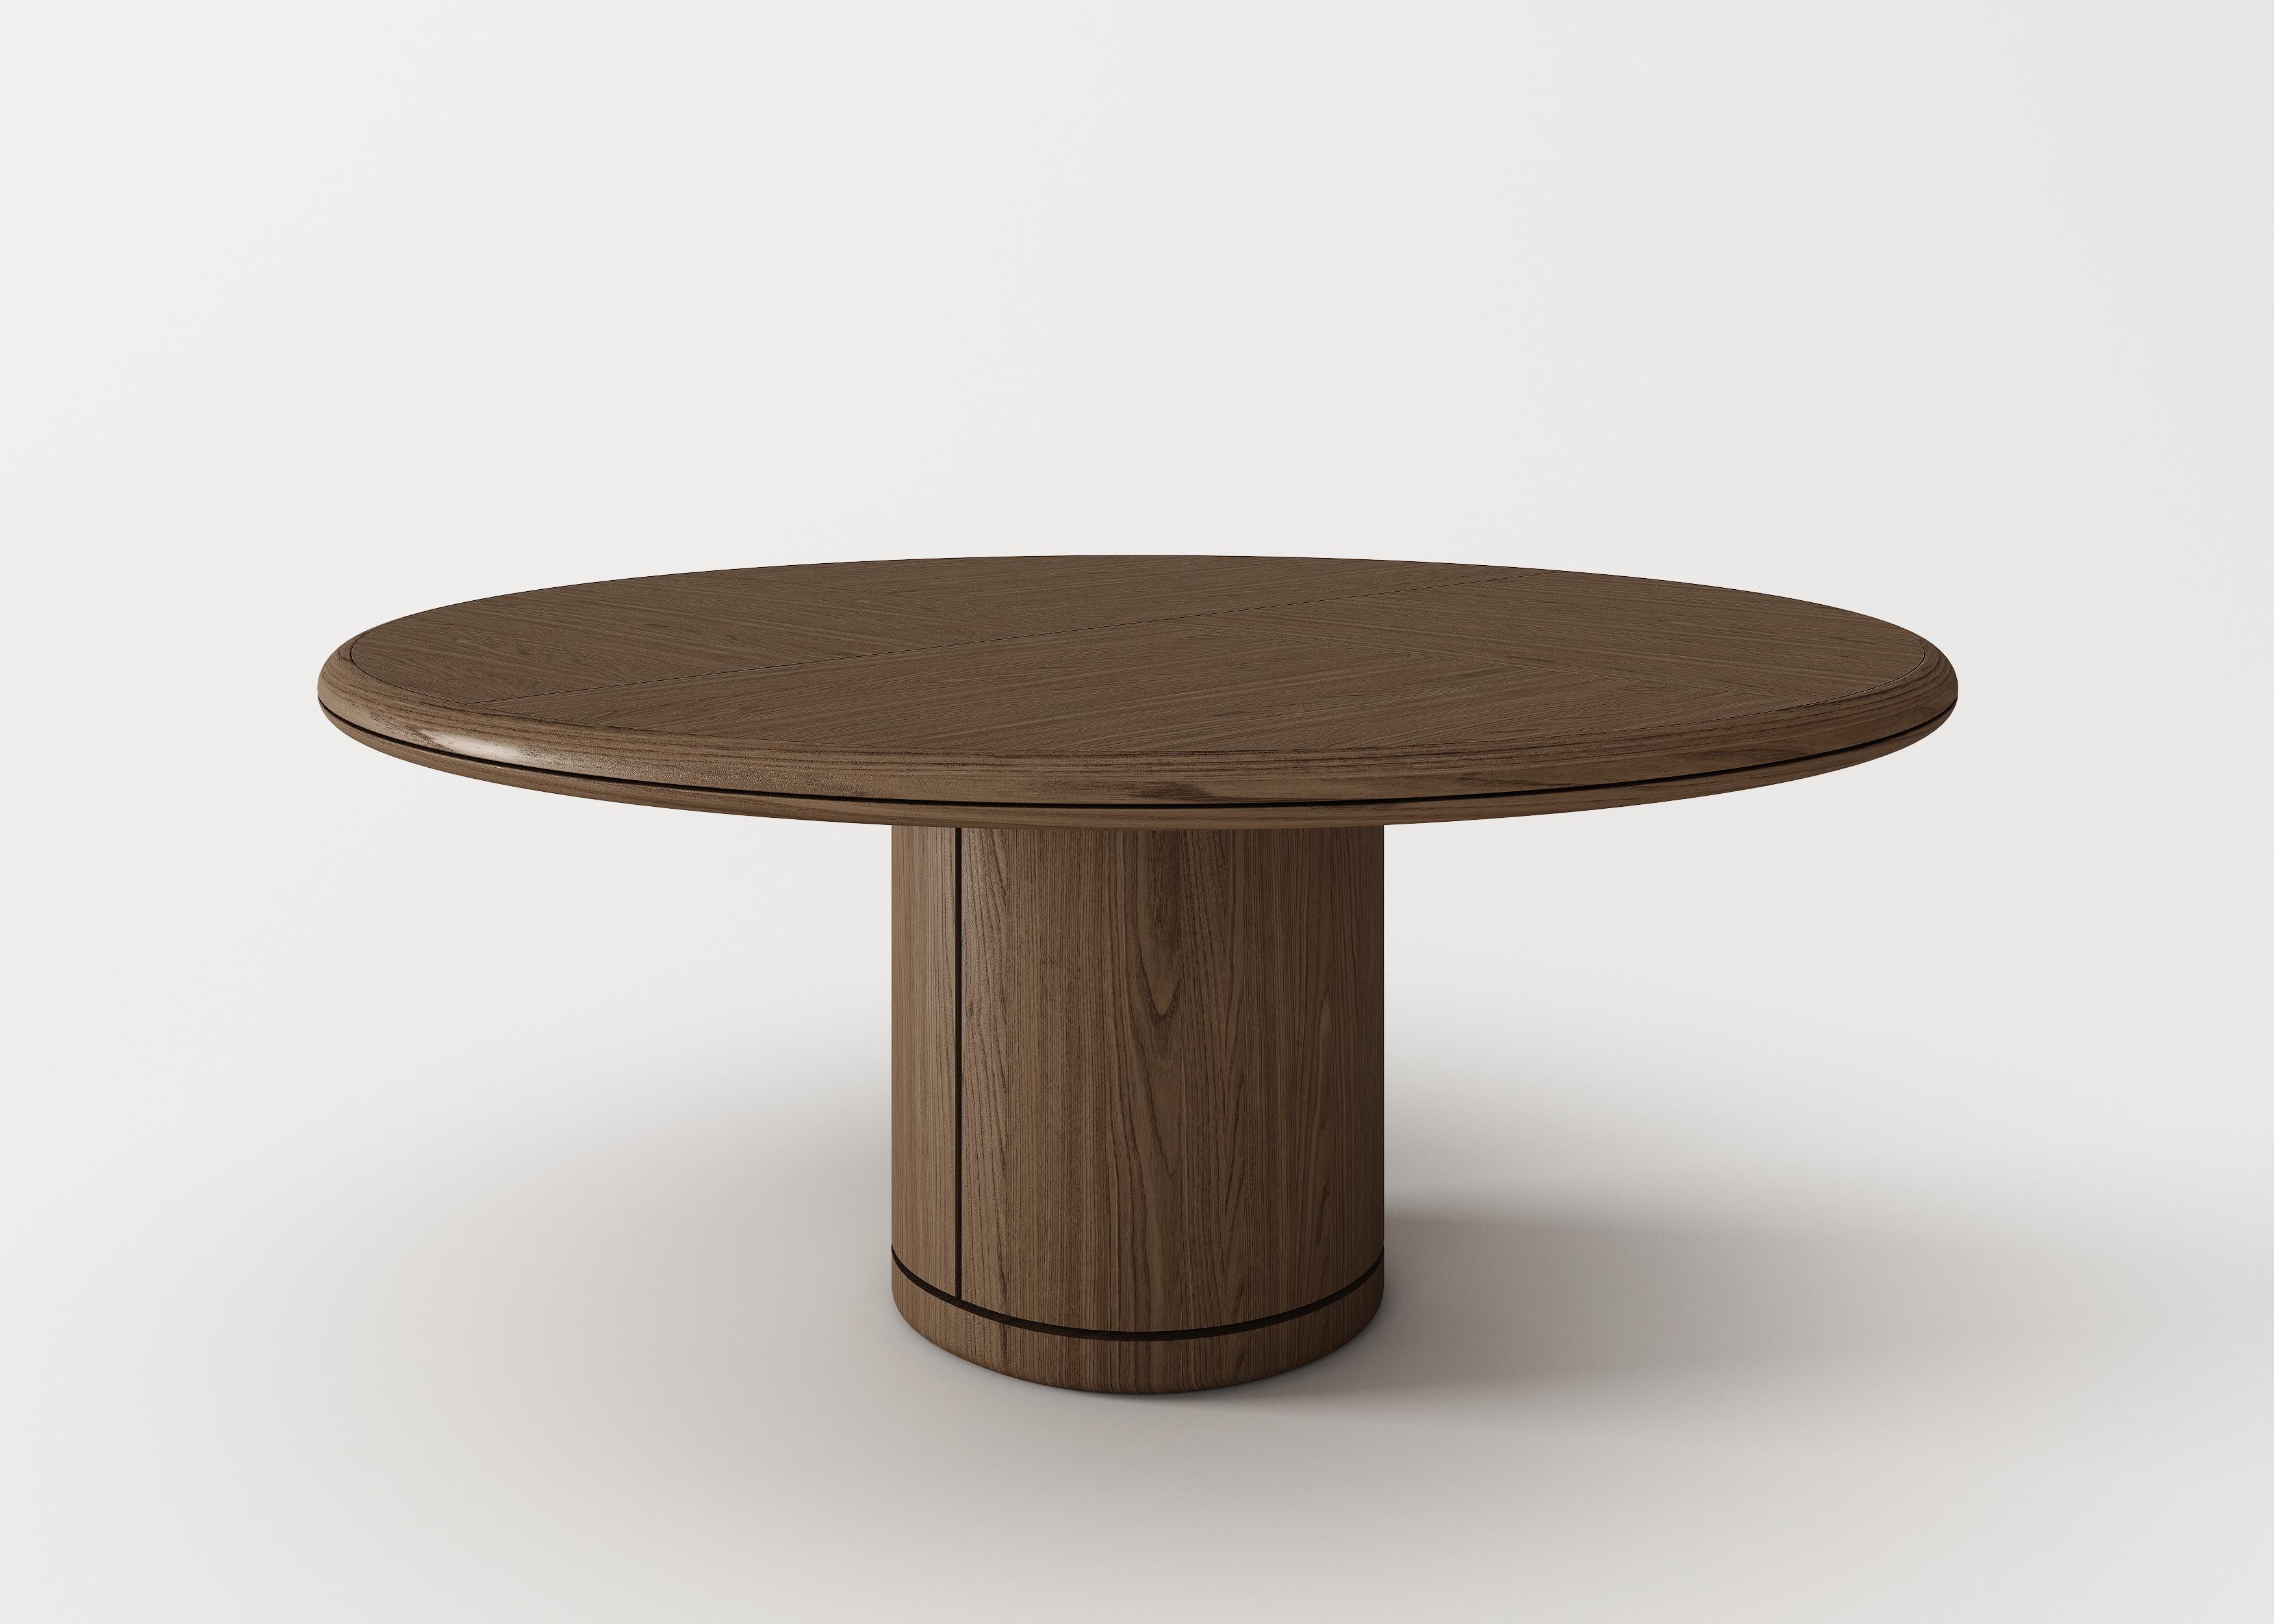 Moon oak round table signed by Buket Hoscan Bazman
Dimensions: Ø 160 x 75 CM
Material: Sandblasted oak dining table

Buket Hoscan Bazman was born in Izmir, Turkey, in 1989. Graduated at the Isik University and after few years of working in the